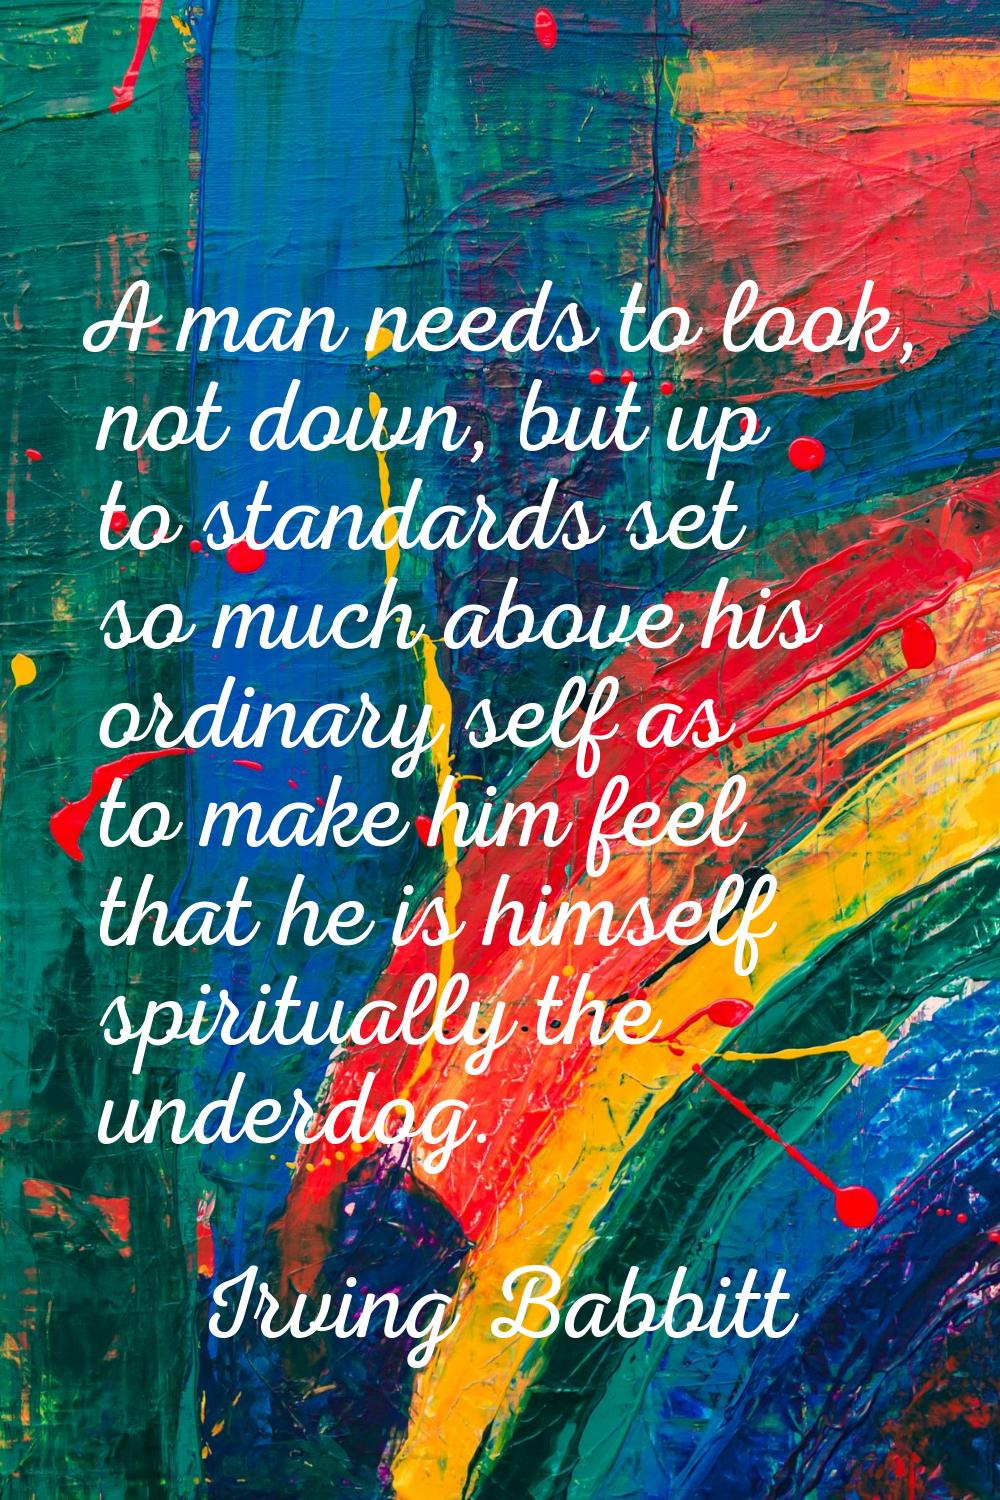 A man needs to look, not down, but up to standards set so much above his ordinary self as to make h